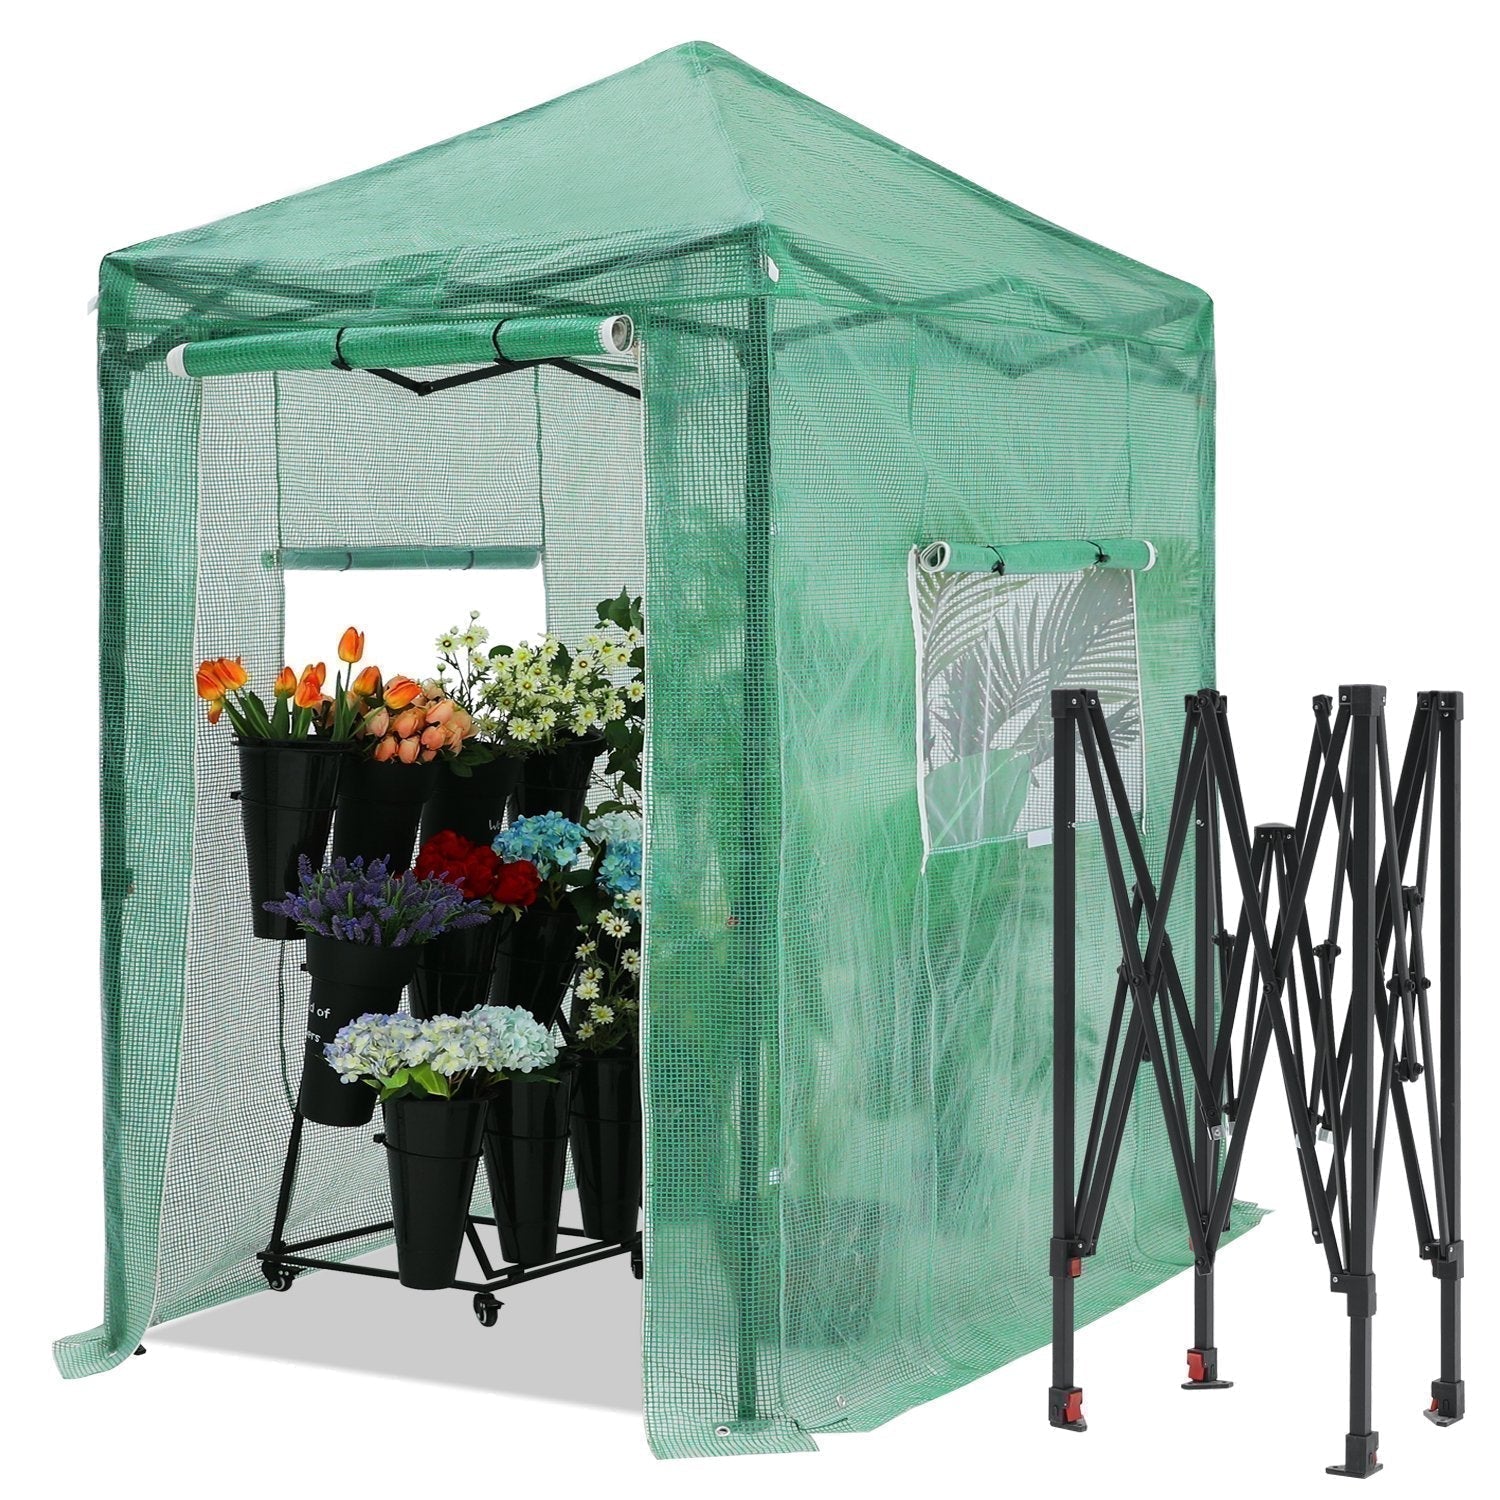 Pop Up Greenhouse Walk-in Garden Greenhouse - ABC-CANOPY